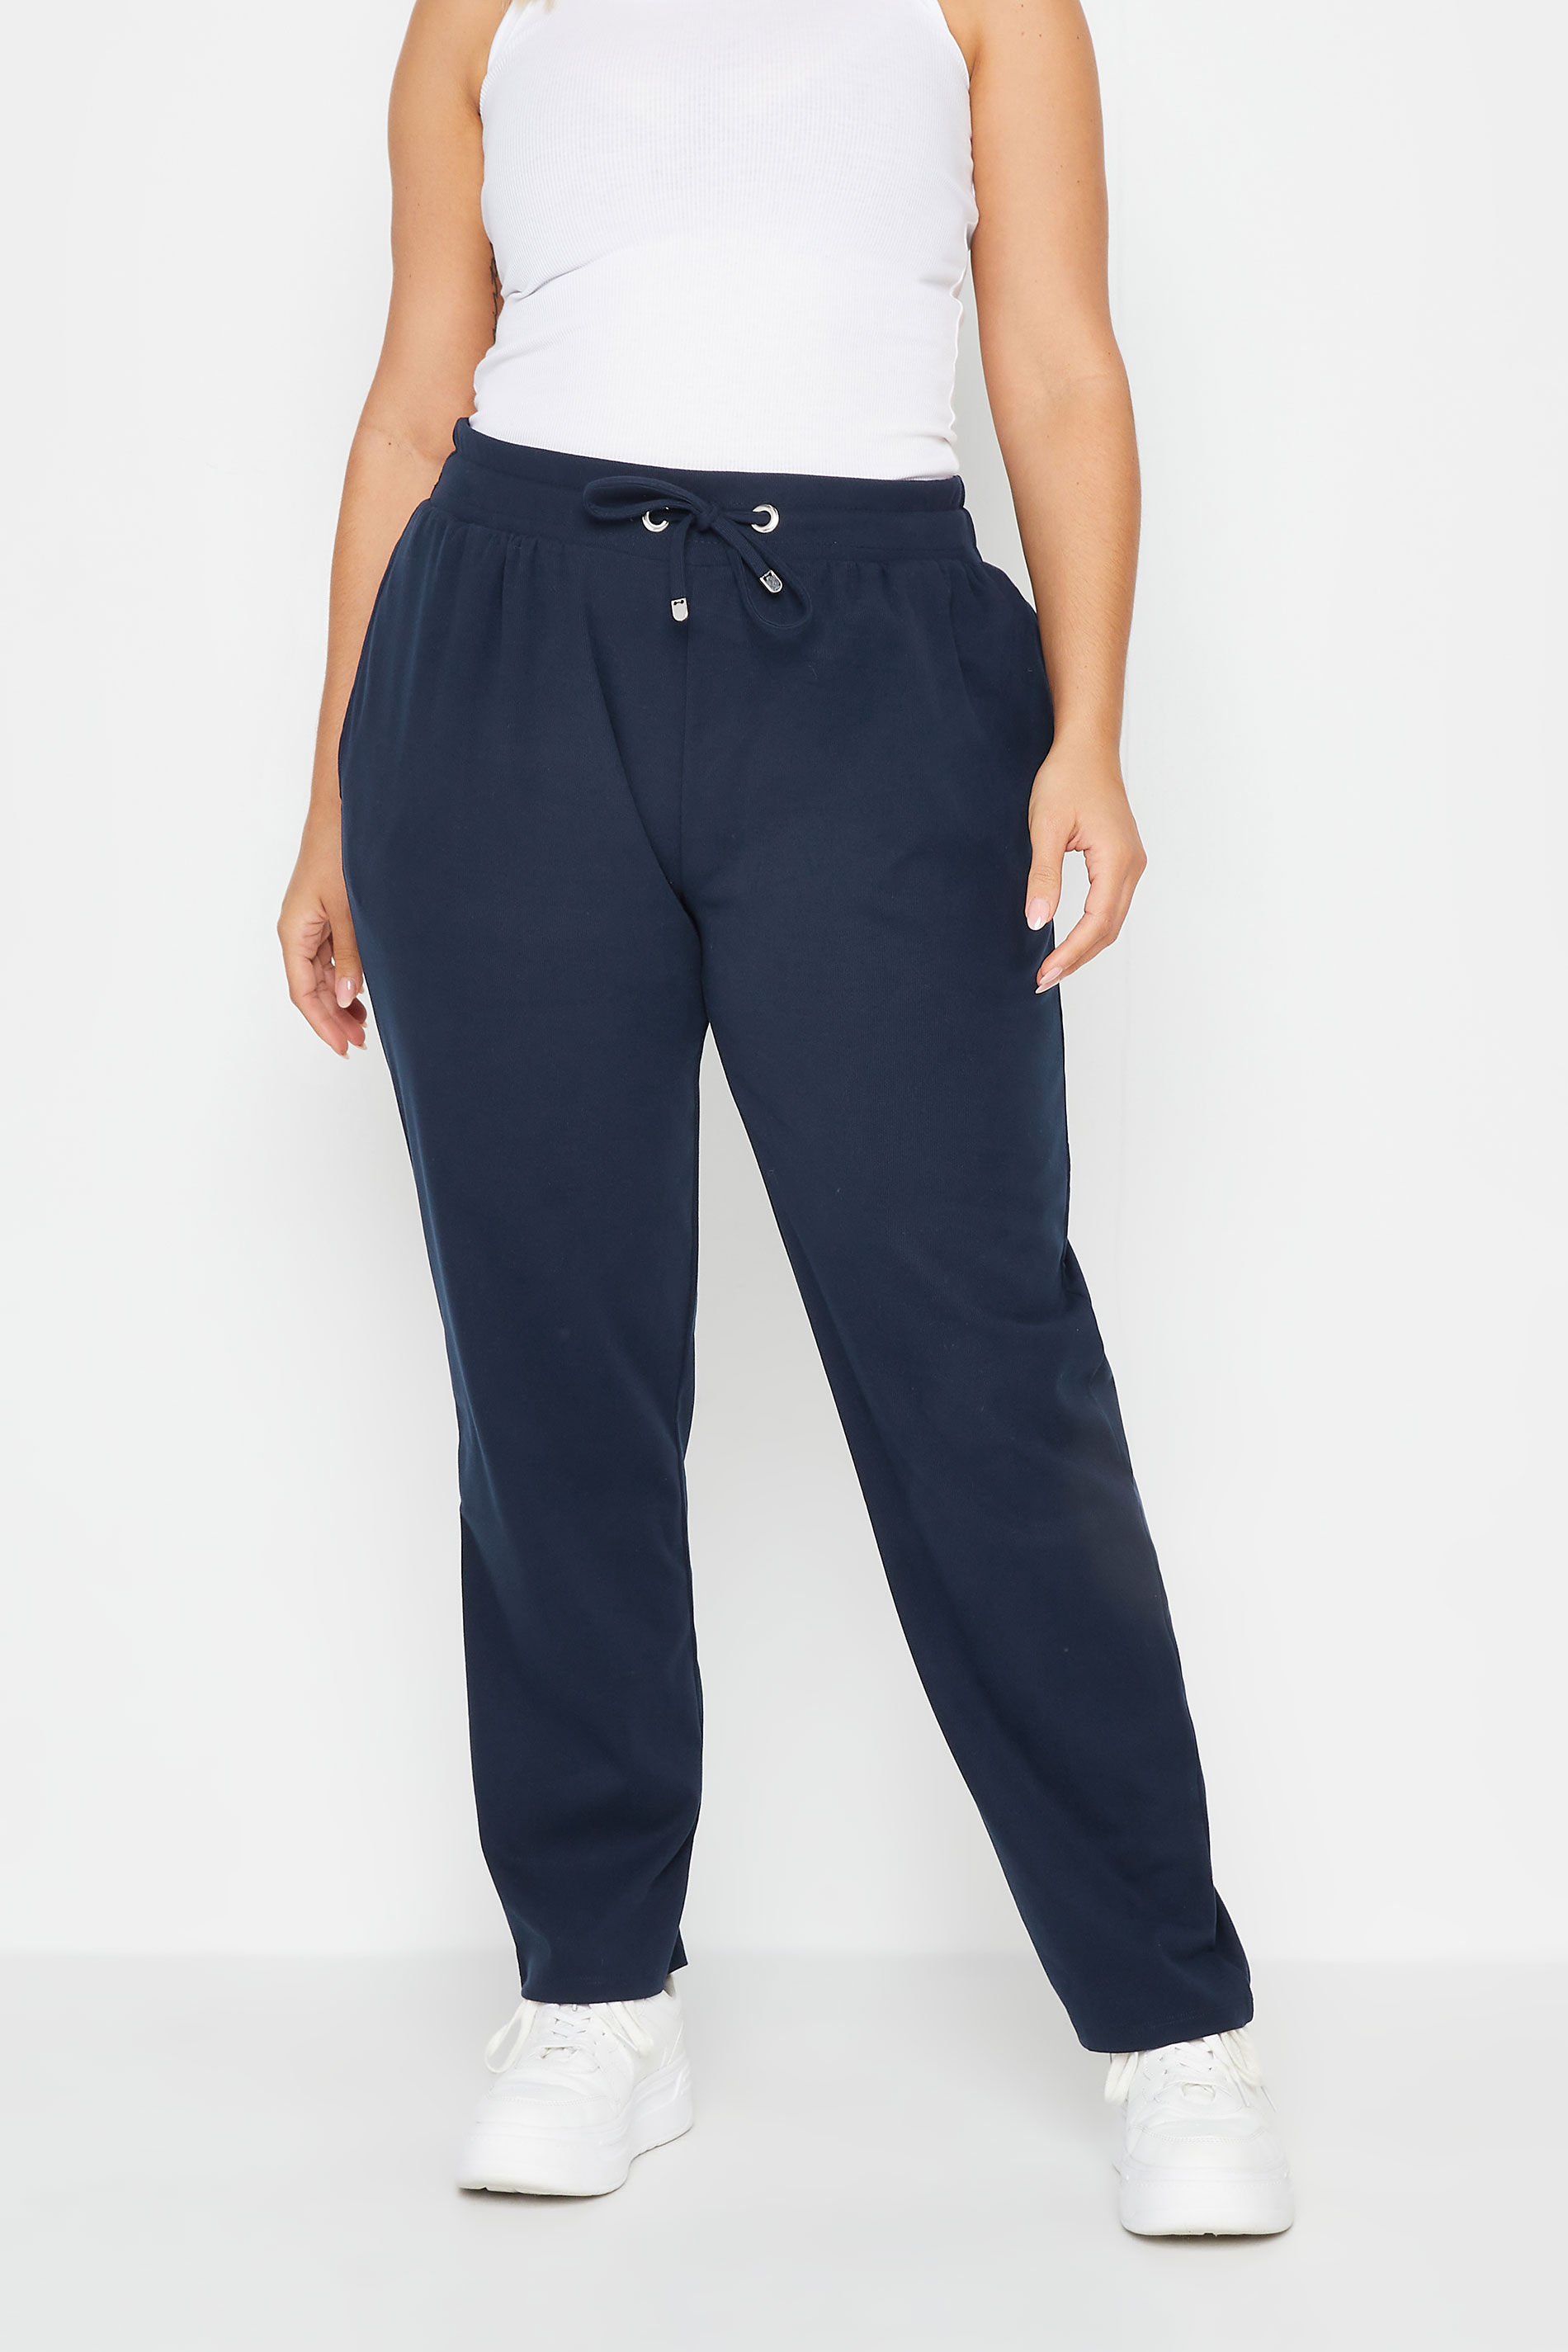 YOURS Plus Size Navy Blue Straight Leg Joggers | Yours Clothing 2